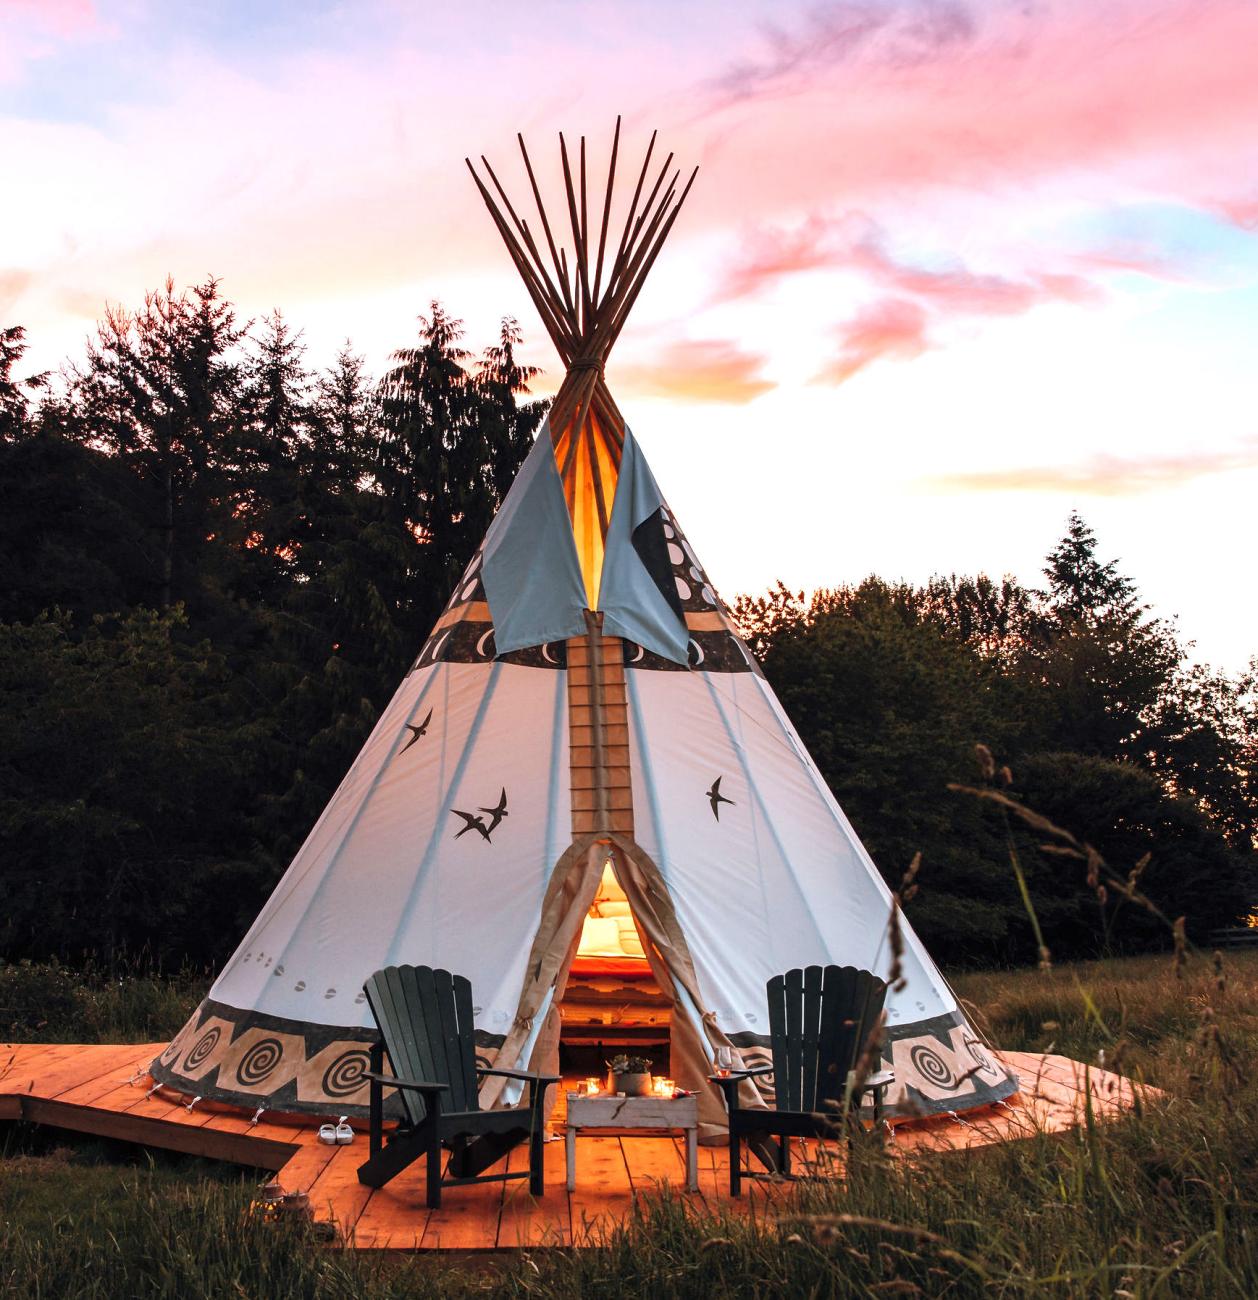 Nomadic tipis to stay in. Sustainable summer.